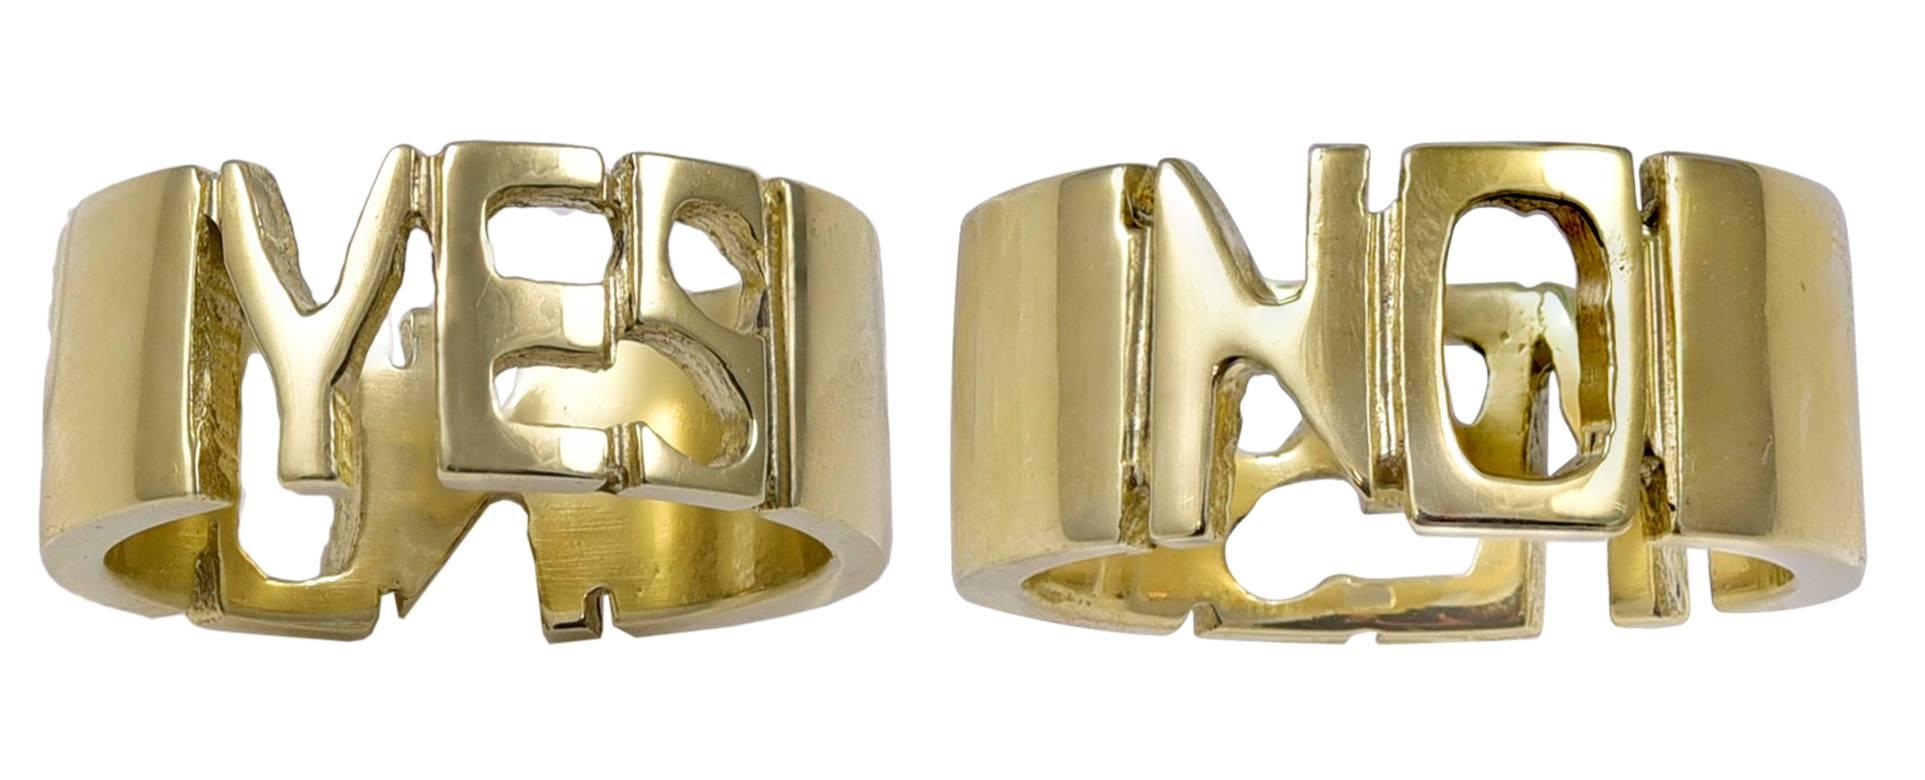 18K yellow gold "mood ring."  Cut-out letters spell out "YES" on the front and "NO" on the back.  This ring is made to order; we can make any size for you.  Great fun to wear.

Alice Kwartler has sold the finest antique